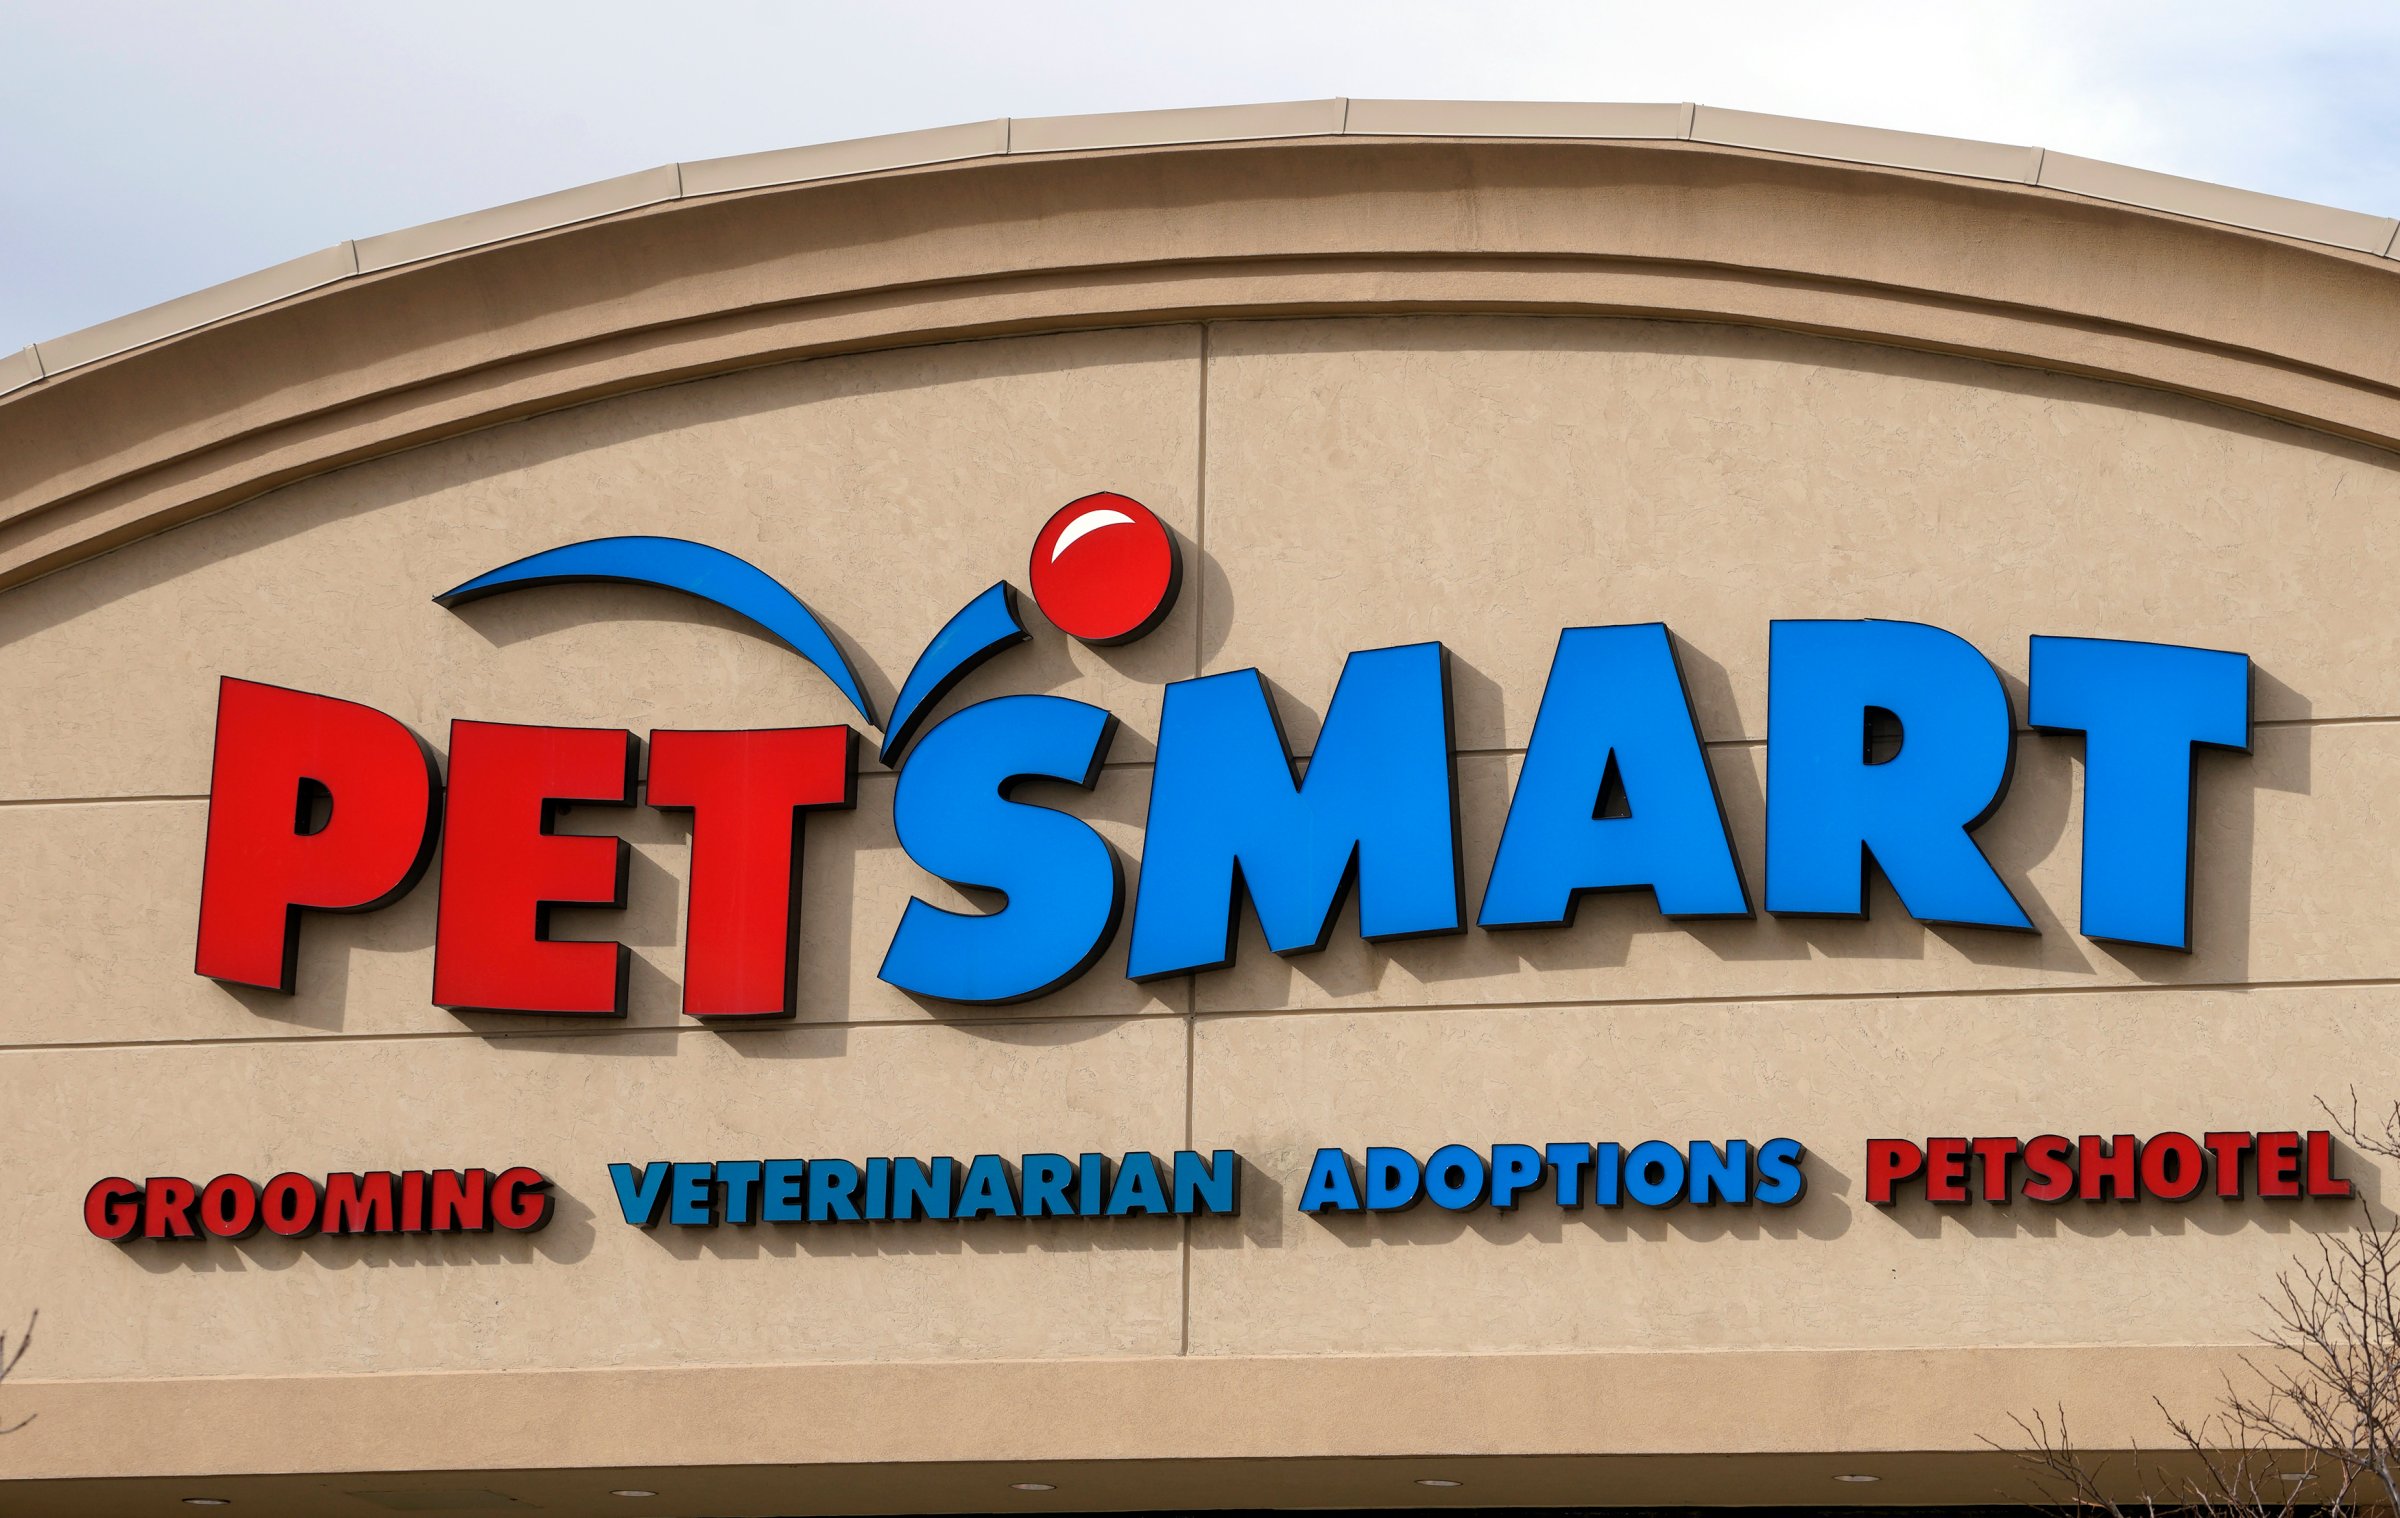 The Petsmart store in Westminster